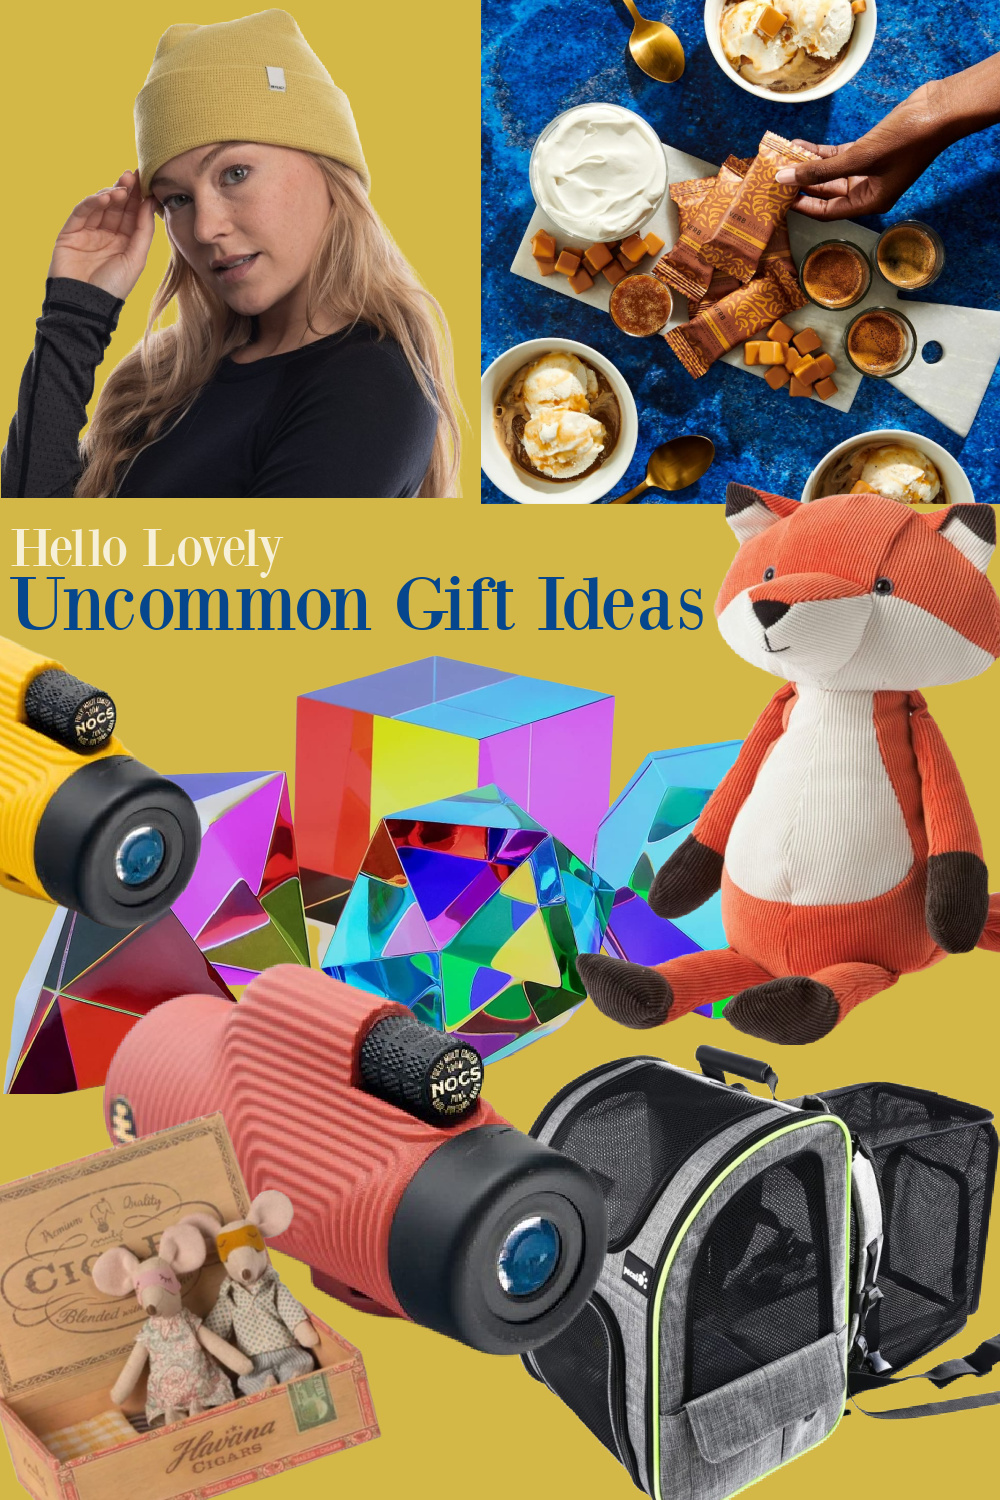 Hello Lovely Uncommon Gifts to consider for all members of the family! #giftguide #holidaygifts #birthdaygifts